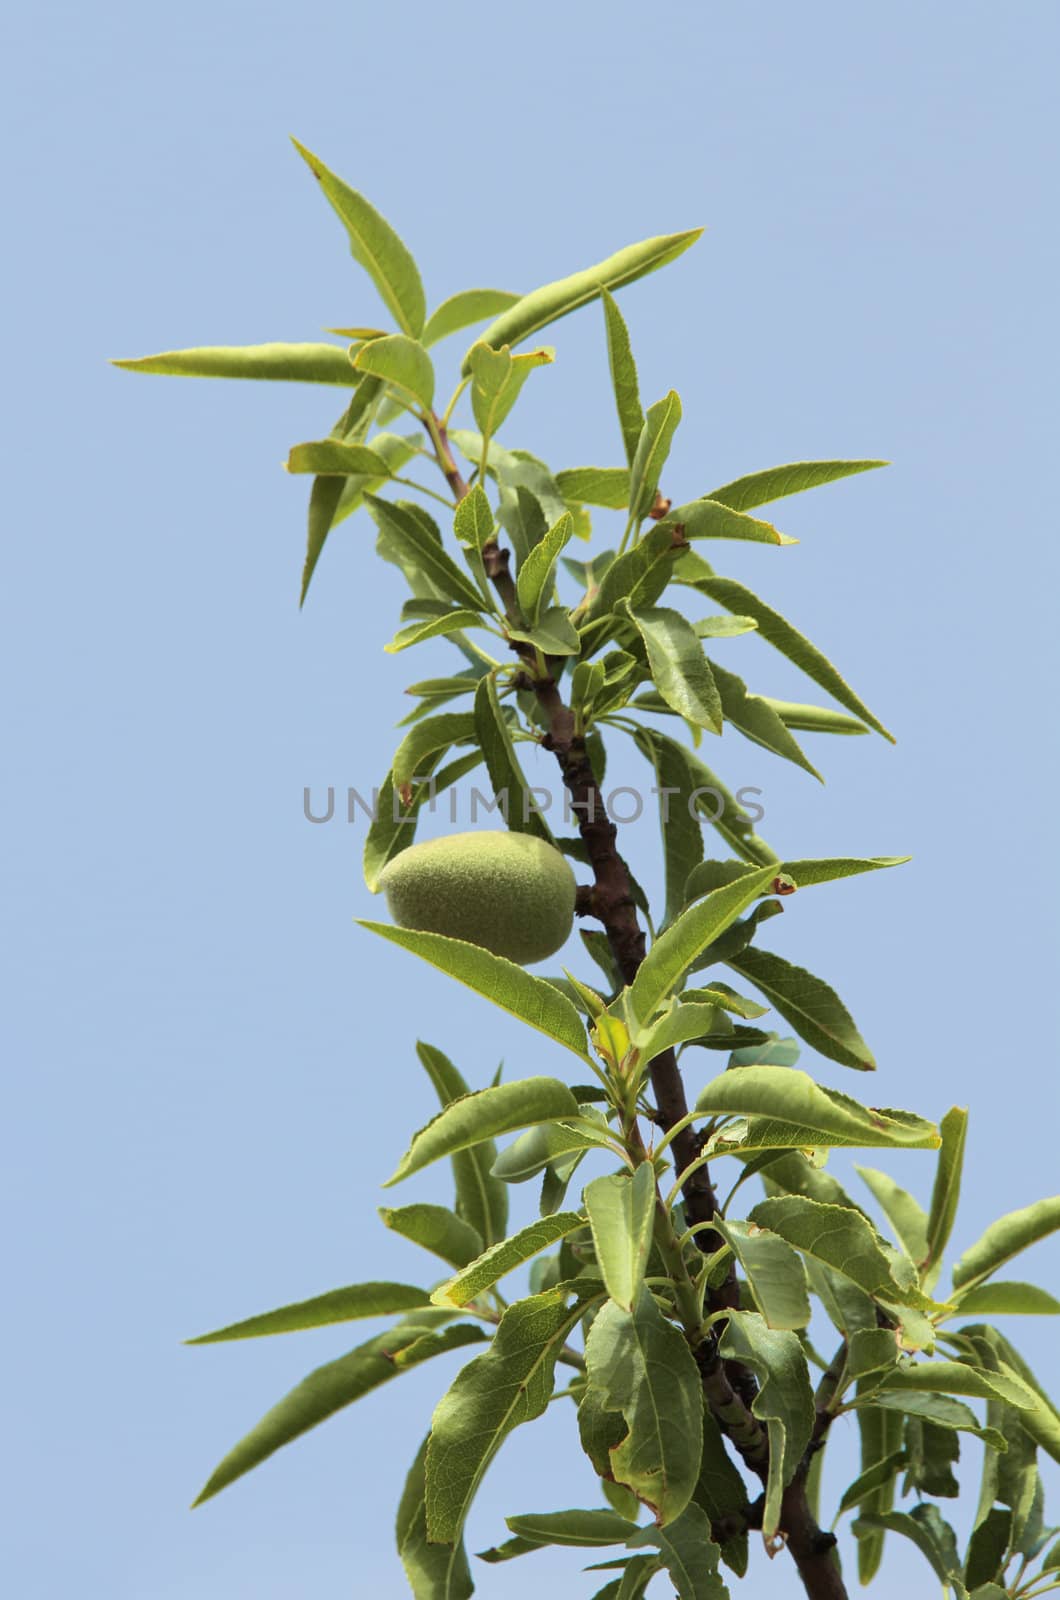 Almond tree with green almonds on a blue sky background